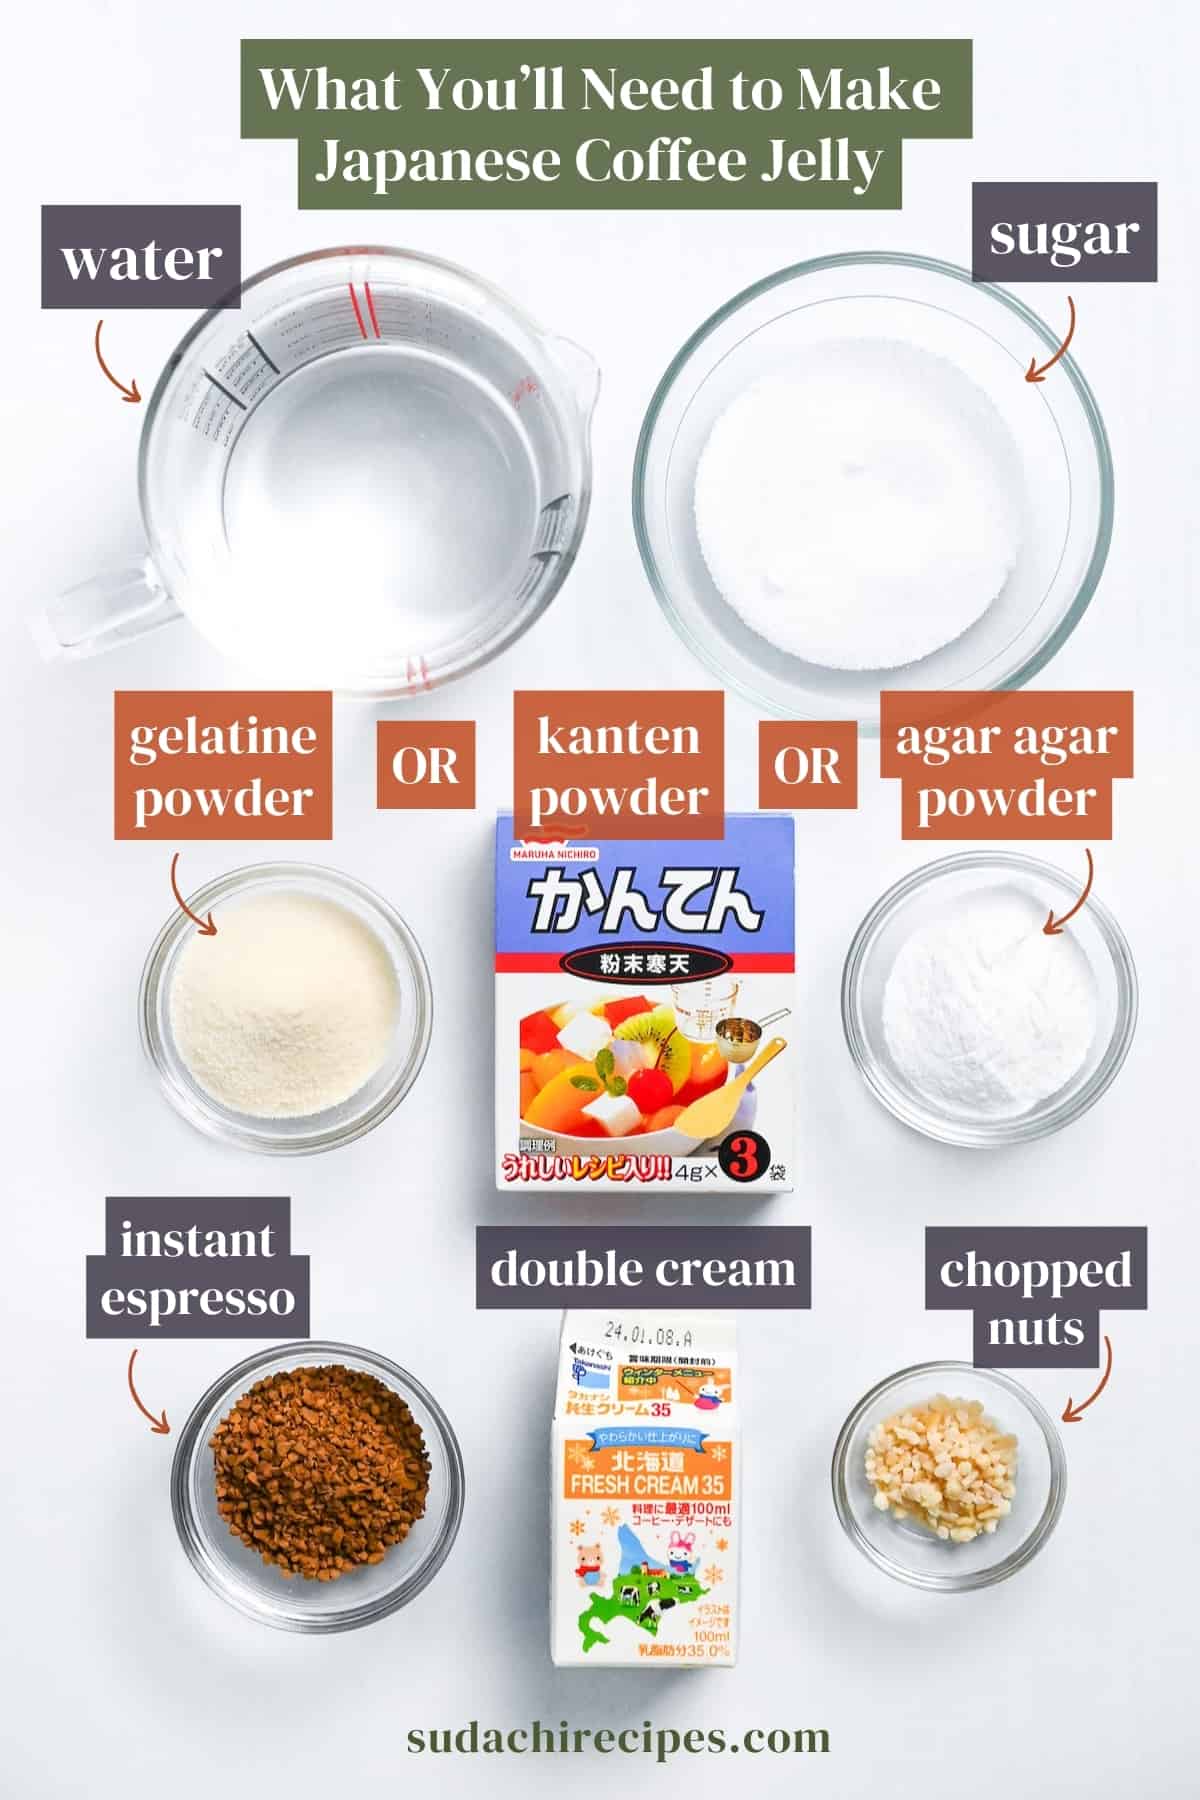 Japanese coffee jelly ingredients on a white background with labels